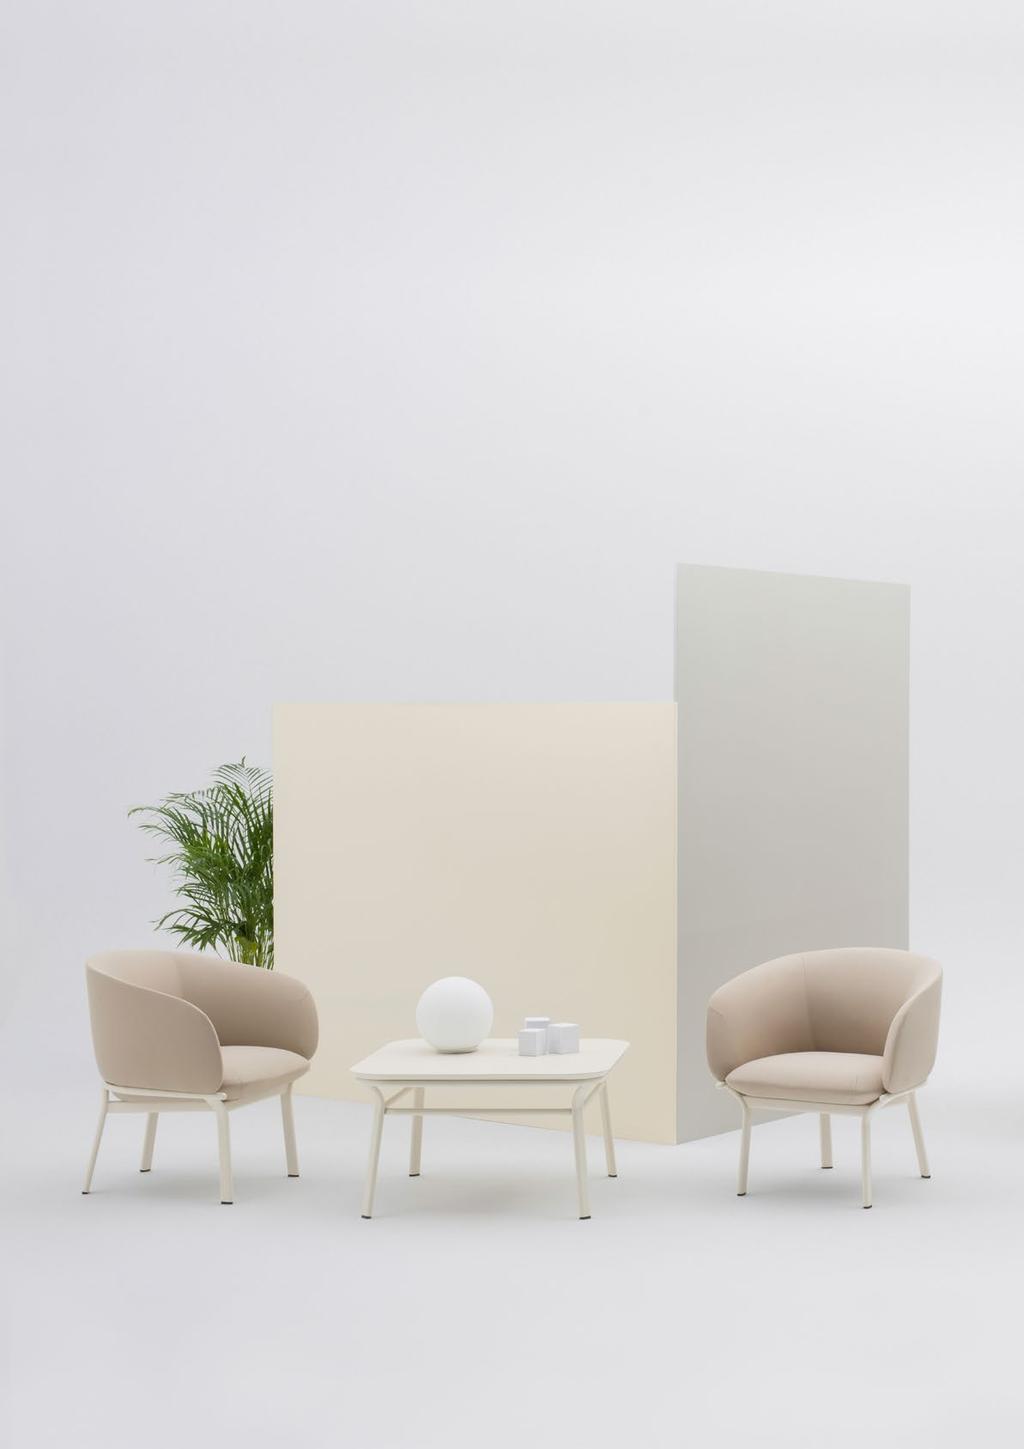 Designed to answer the demands of common areas, the furniture family includes sofa, armchair and two tables. Featuring sleek design and thoughtful proportions, it graces every room.